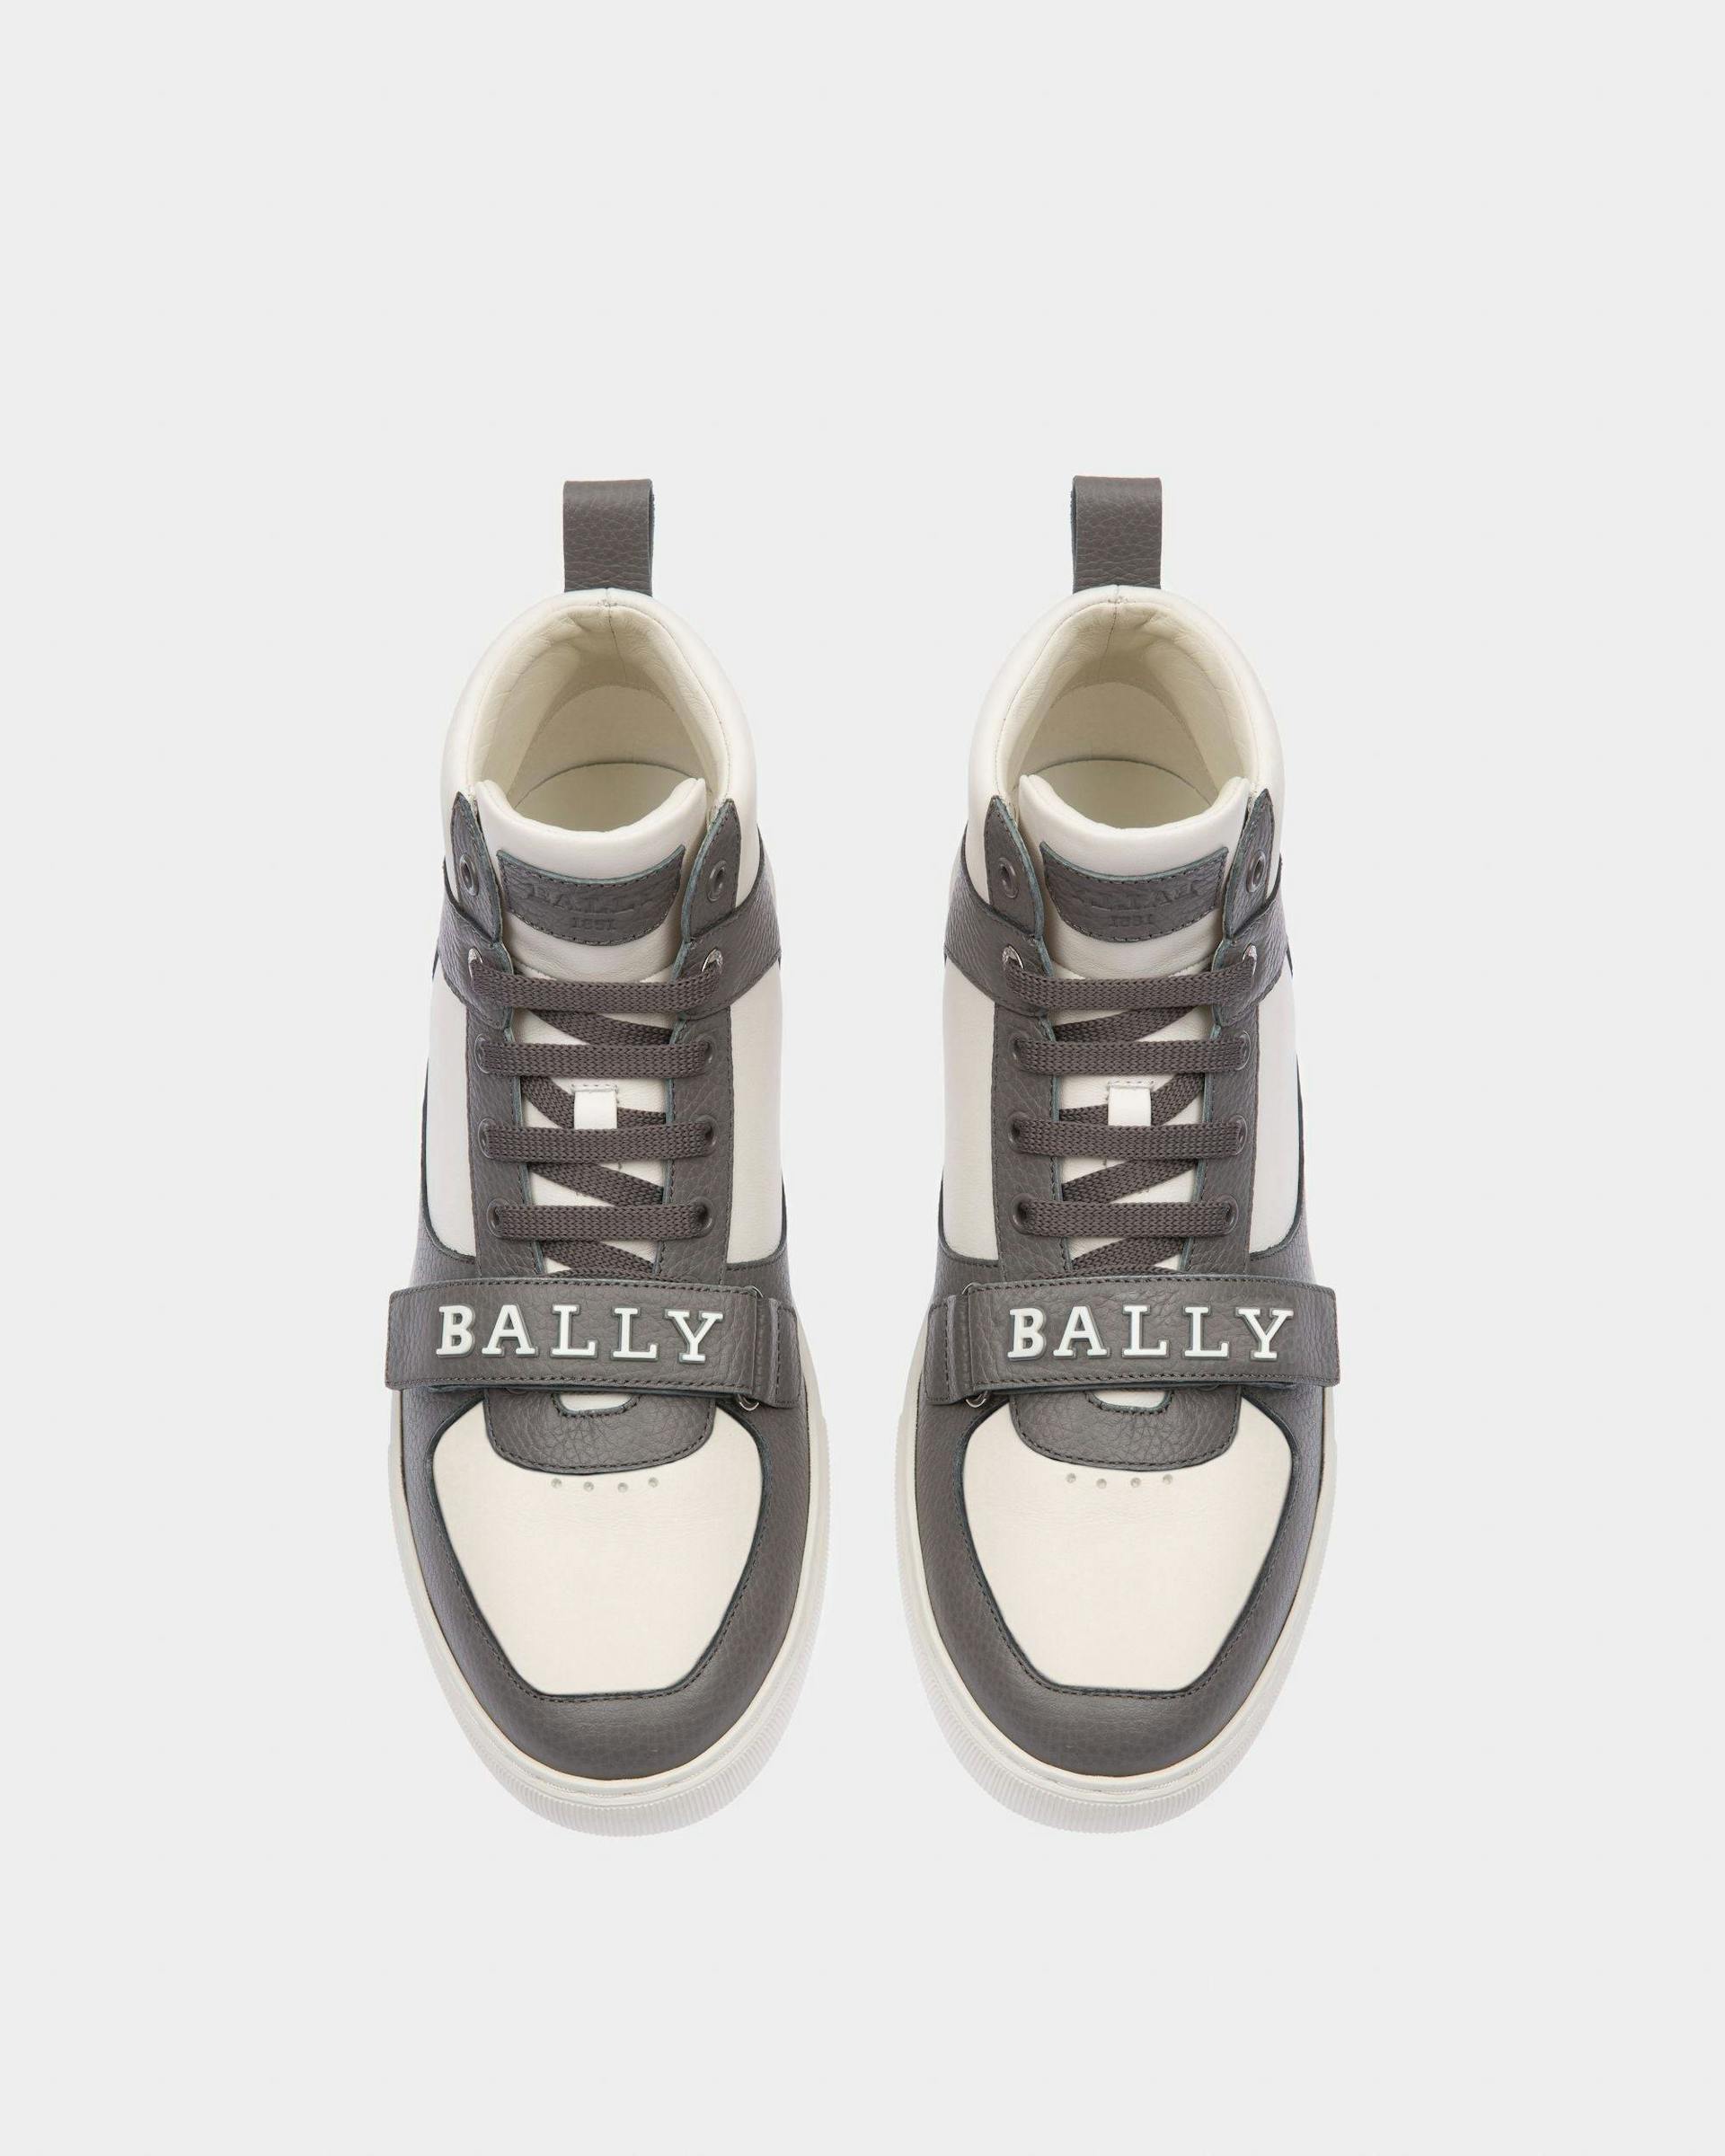 Merryk Leather Sneakers In Grey And White - Men's - Bally - 02